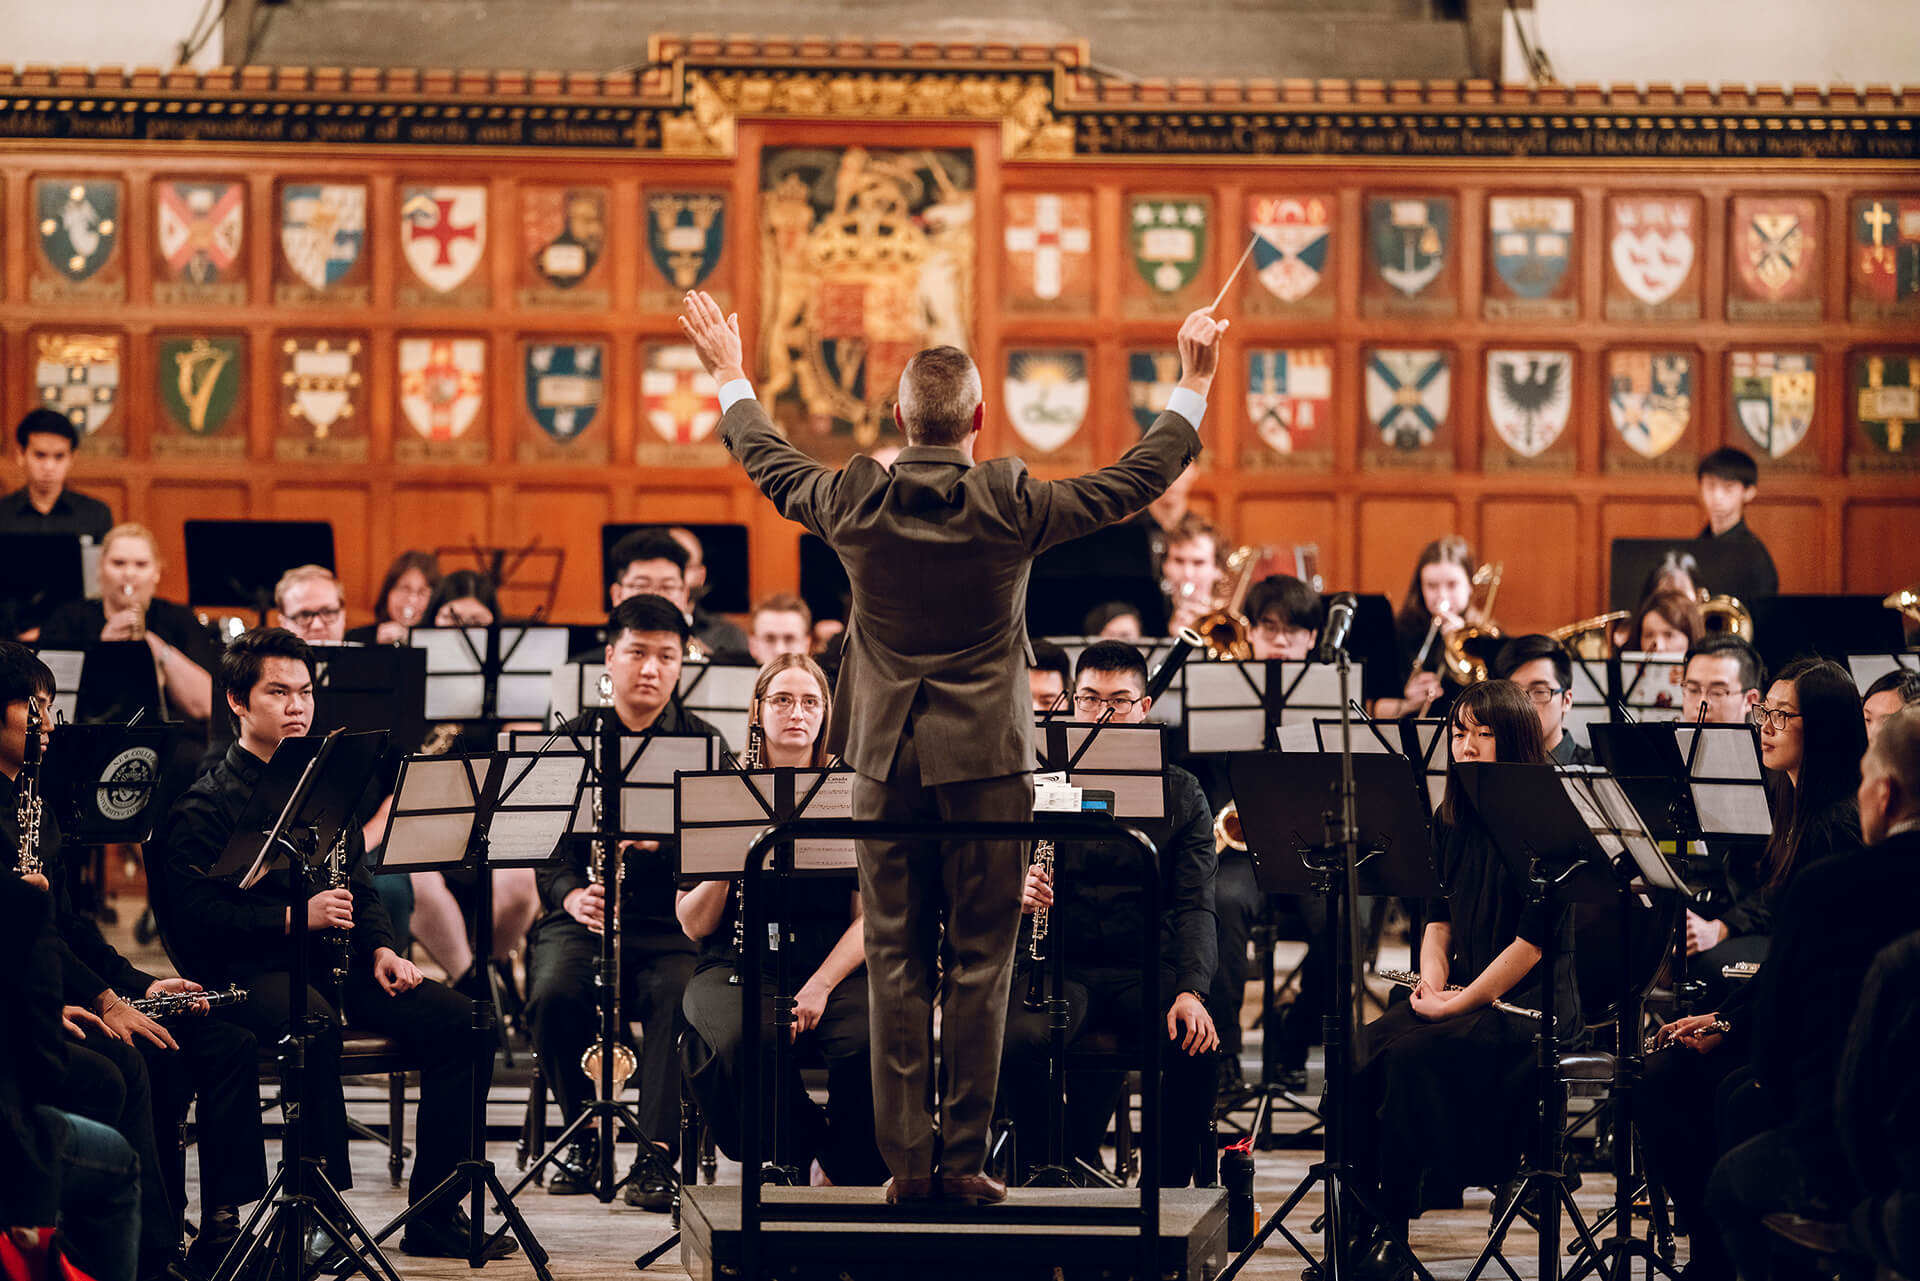 Band sitting with their musical instruments and a large collection of heraldry shields display on the wall behind them and a conductor standing and leading the band